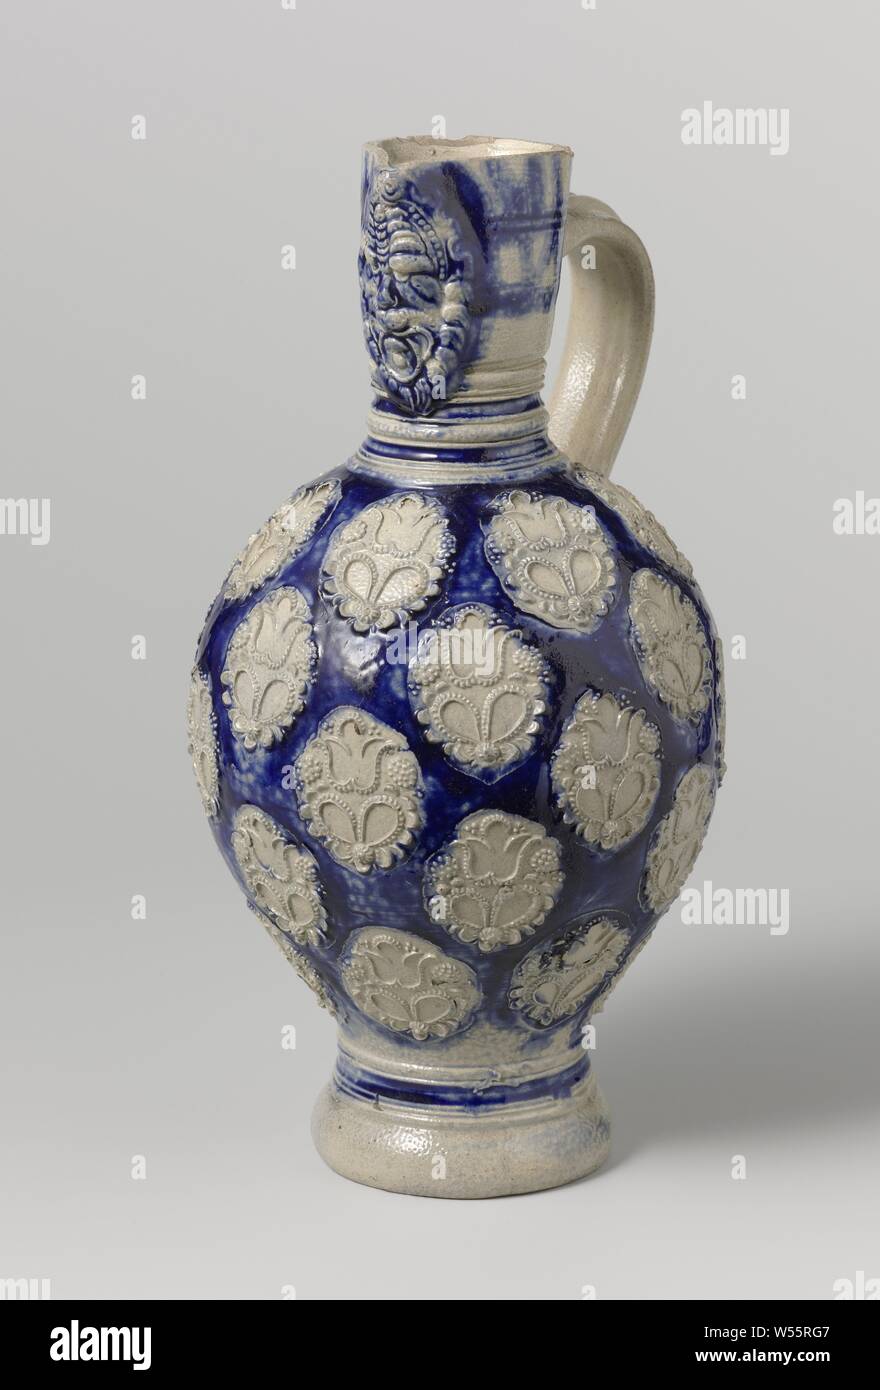 Jug with a lion's head and medallions, Westerwald, c. 1650 - c. 1699, stoneware, glaze, cobalt (mineral), vitrification, h 28.5 cm Stock Photo